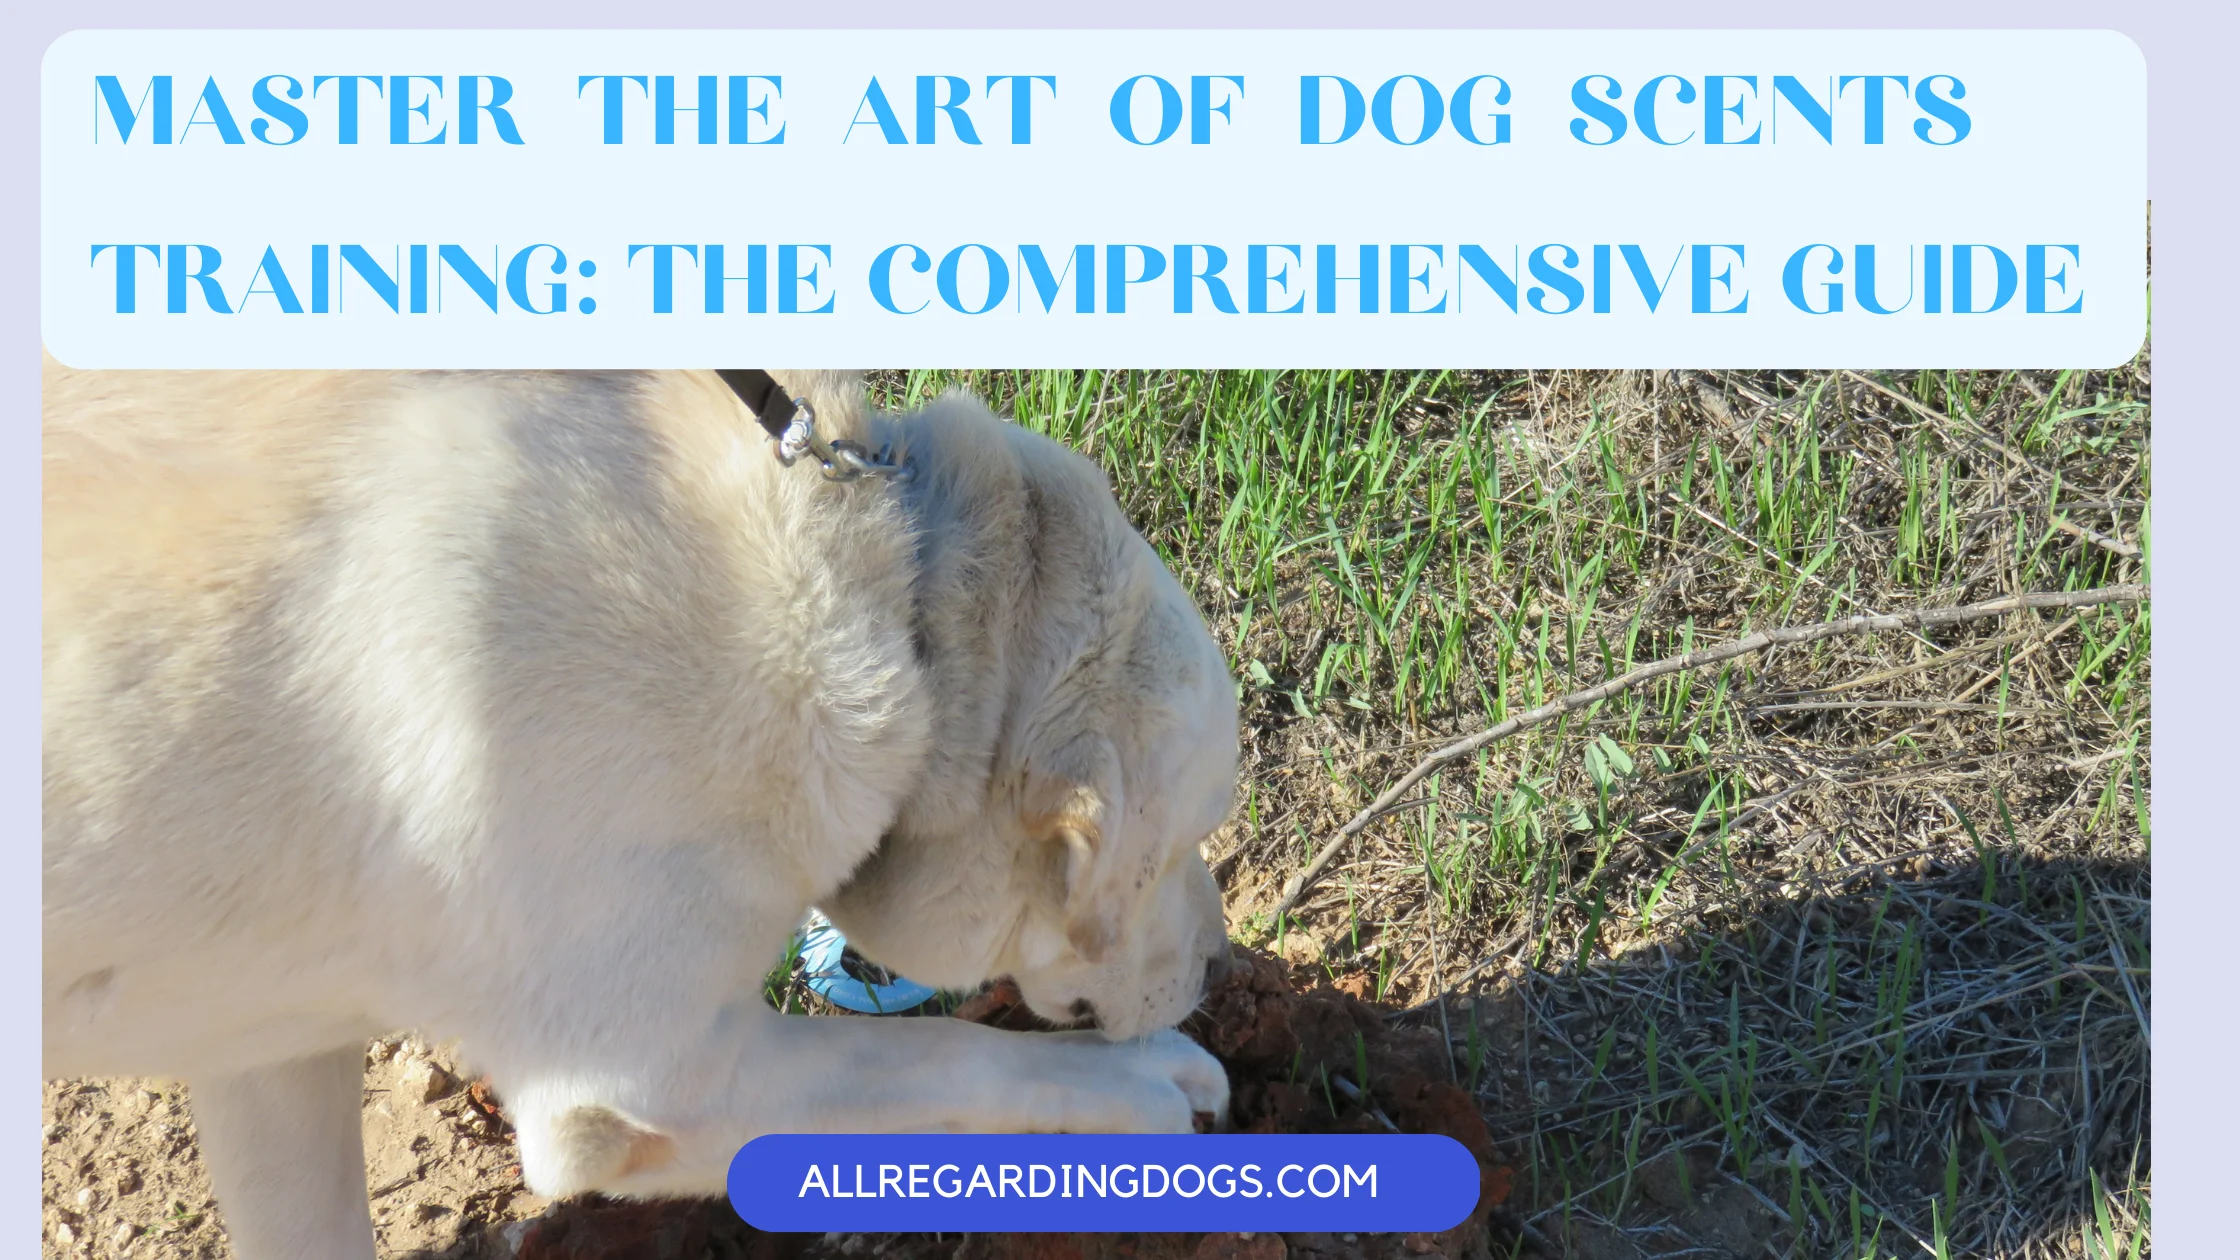 Master the Art of Dog Scents Training: The Comprehensive Guide